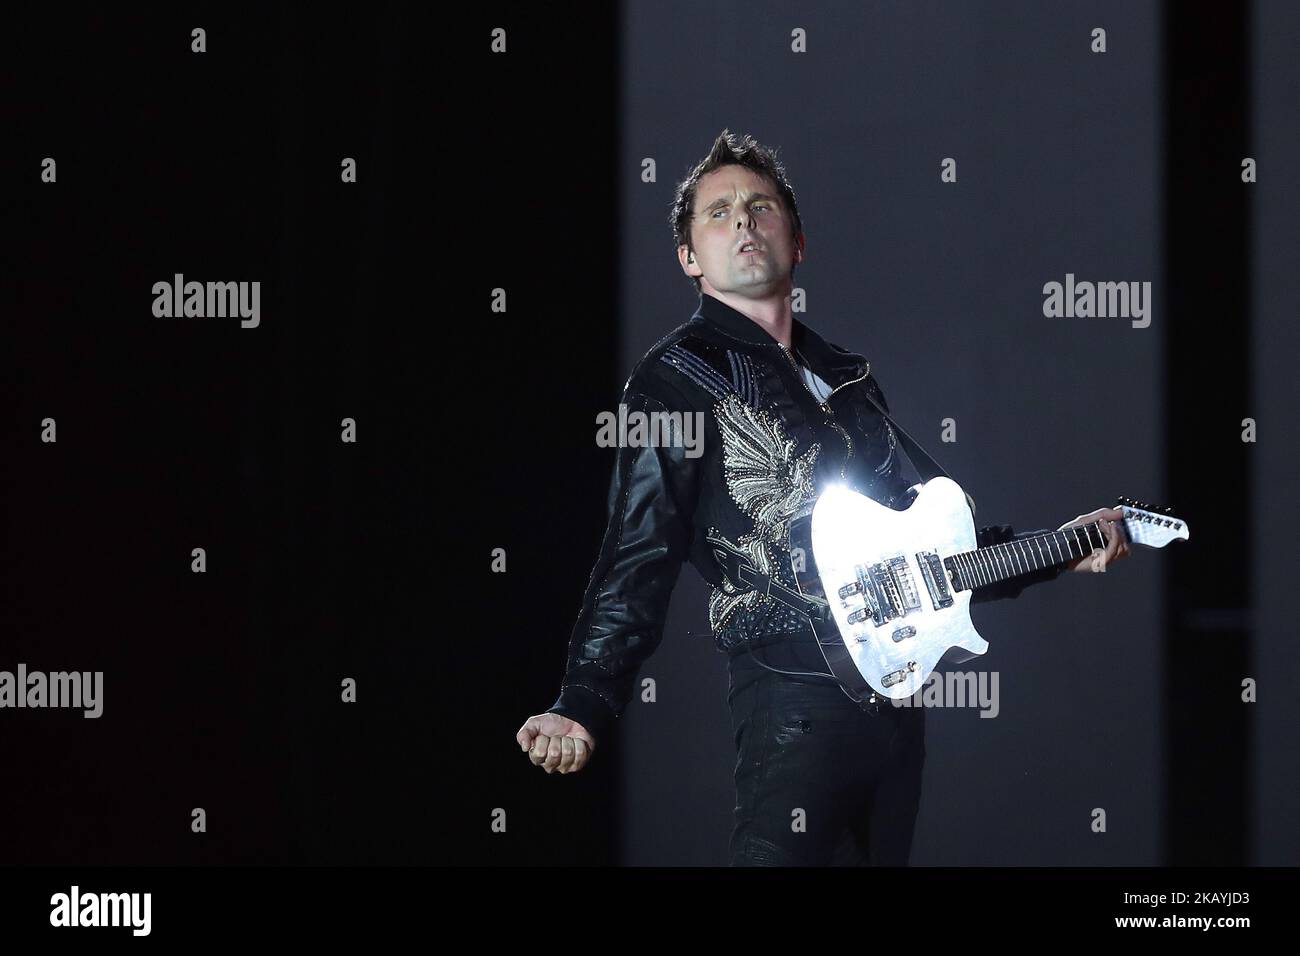 British rock band Muse lead singer Matthew Bellamy performs at the Rock in Rio Lisbon 2018 music festival in Lisbon, Portugal, on June 23, 2018. ( Photo by Pedro Fiúza/NurPhoto) Stock Photo